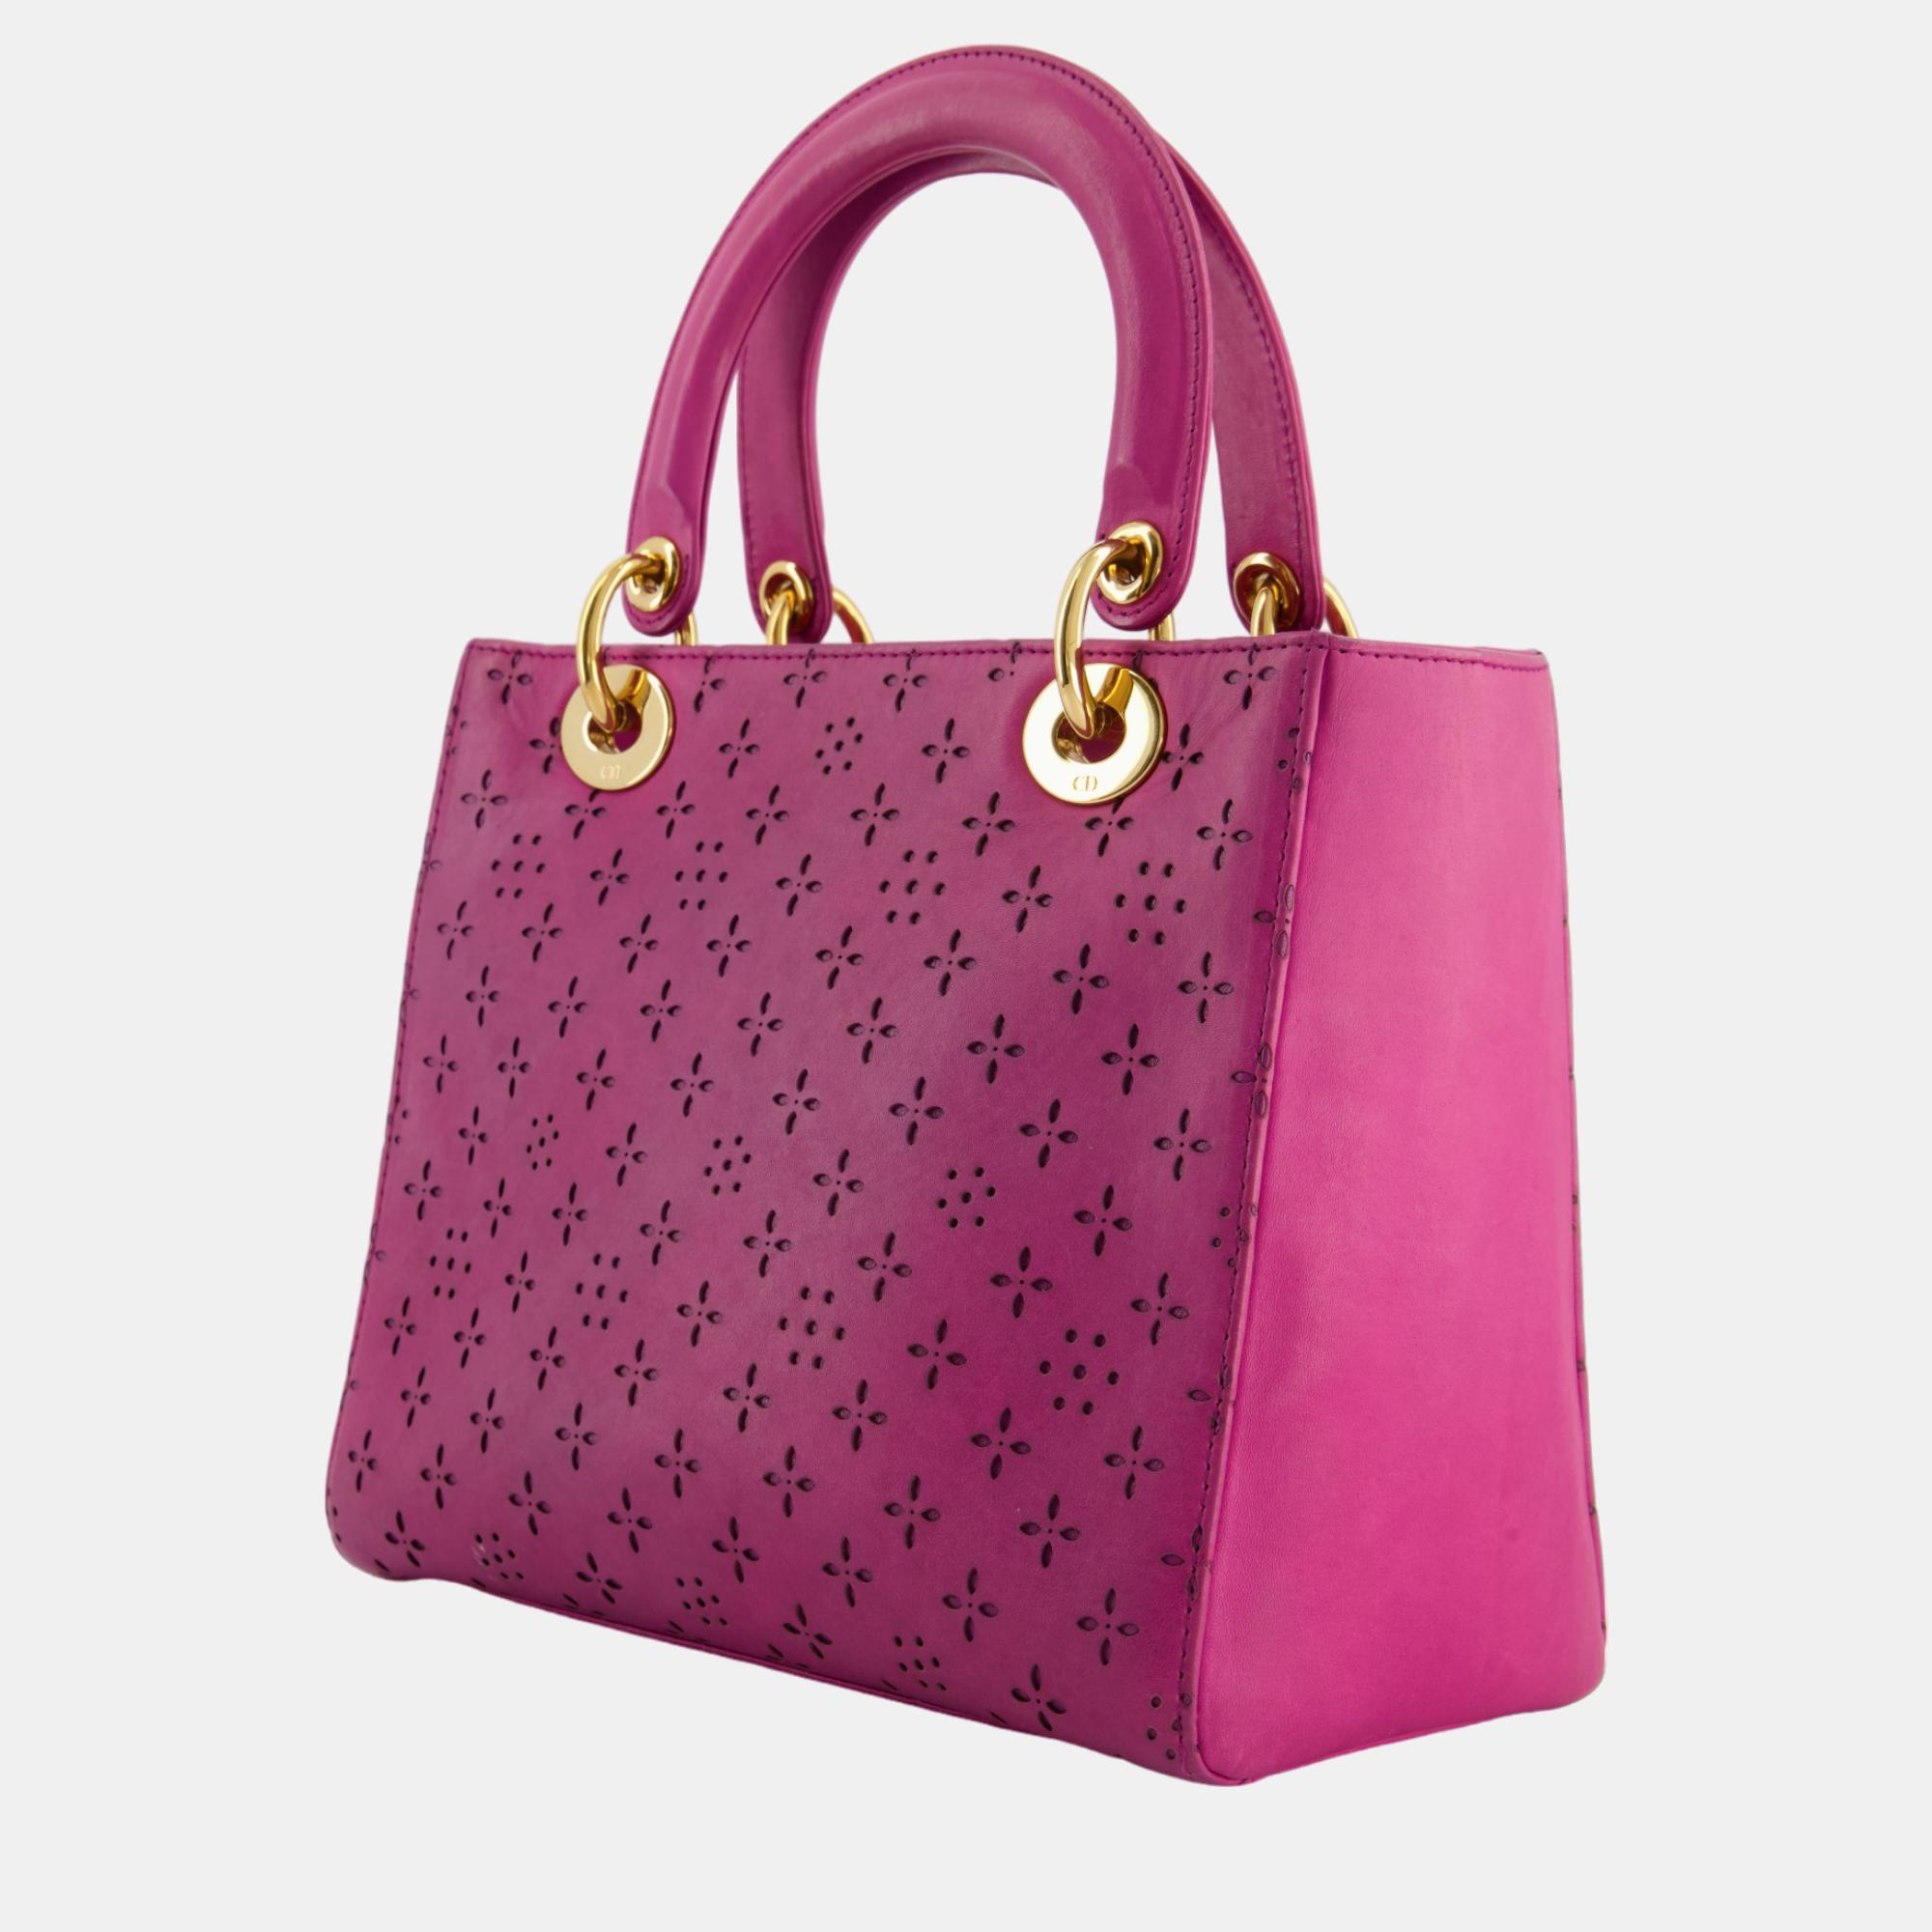 Christian Dior Vintage Medium Lady Dior Bag In Fuchsia Leather With Gold Hardware